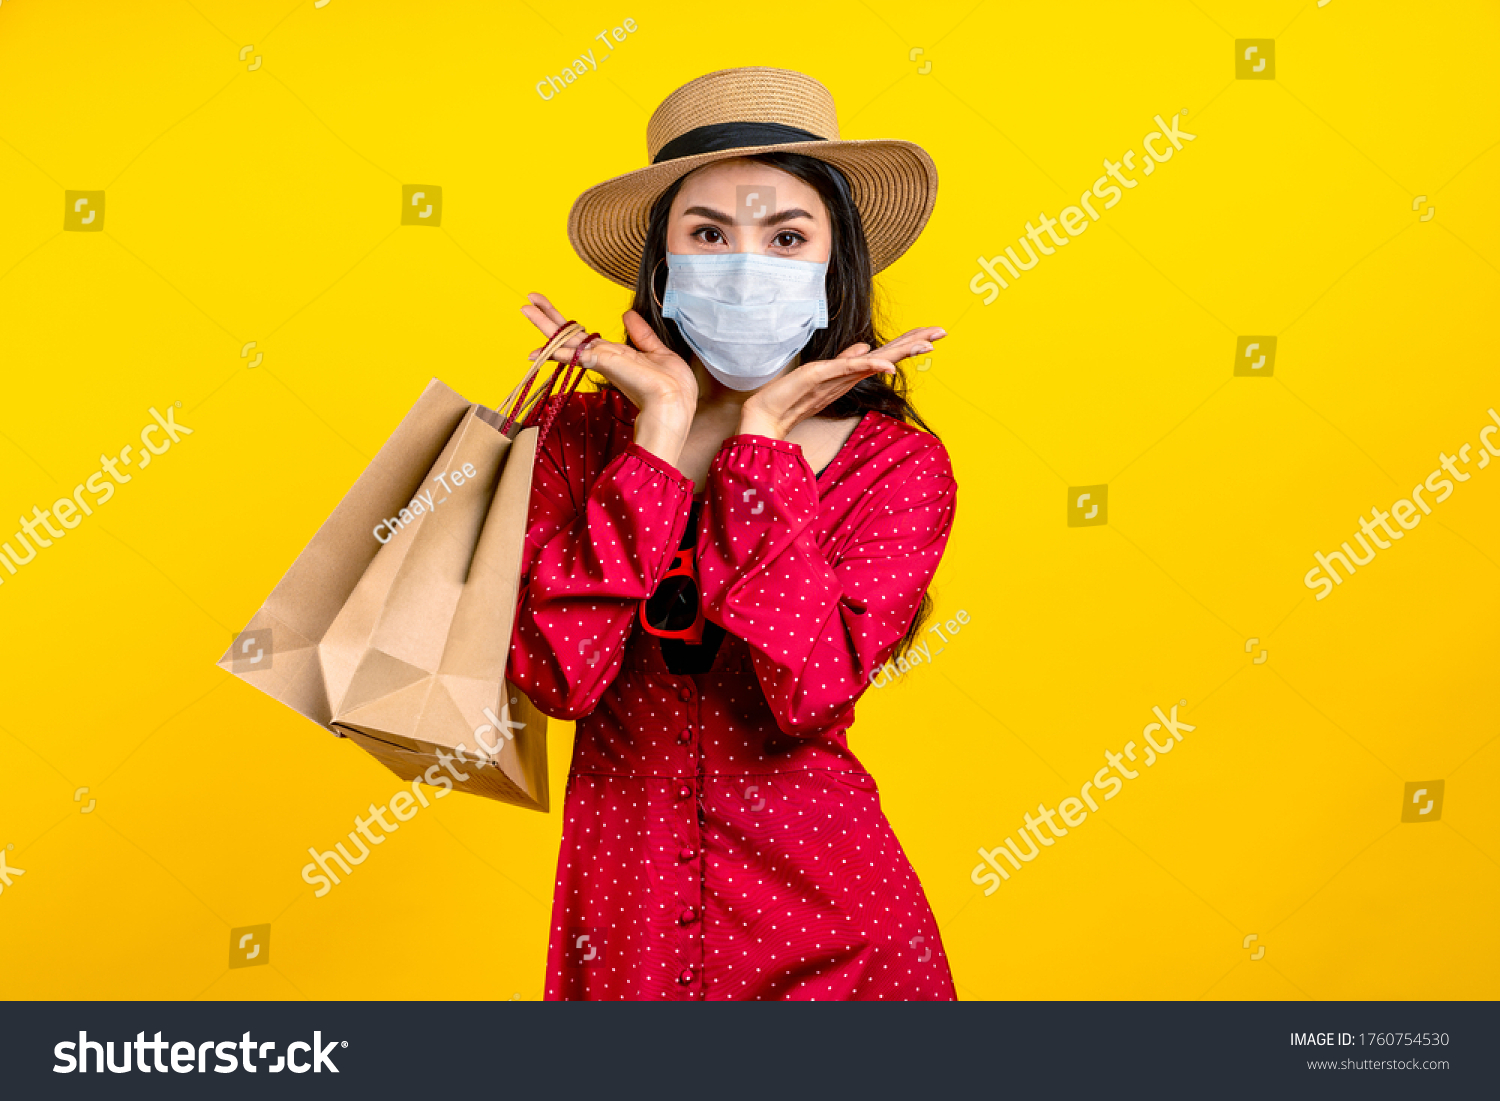 Portrait of young happy carefree asian woman wear hat and facemask carrying shop bag smile on isolated color background in concept back to shopping, new normal summer fashion lifestyle after covid19. #1760754530